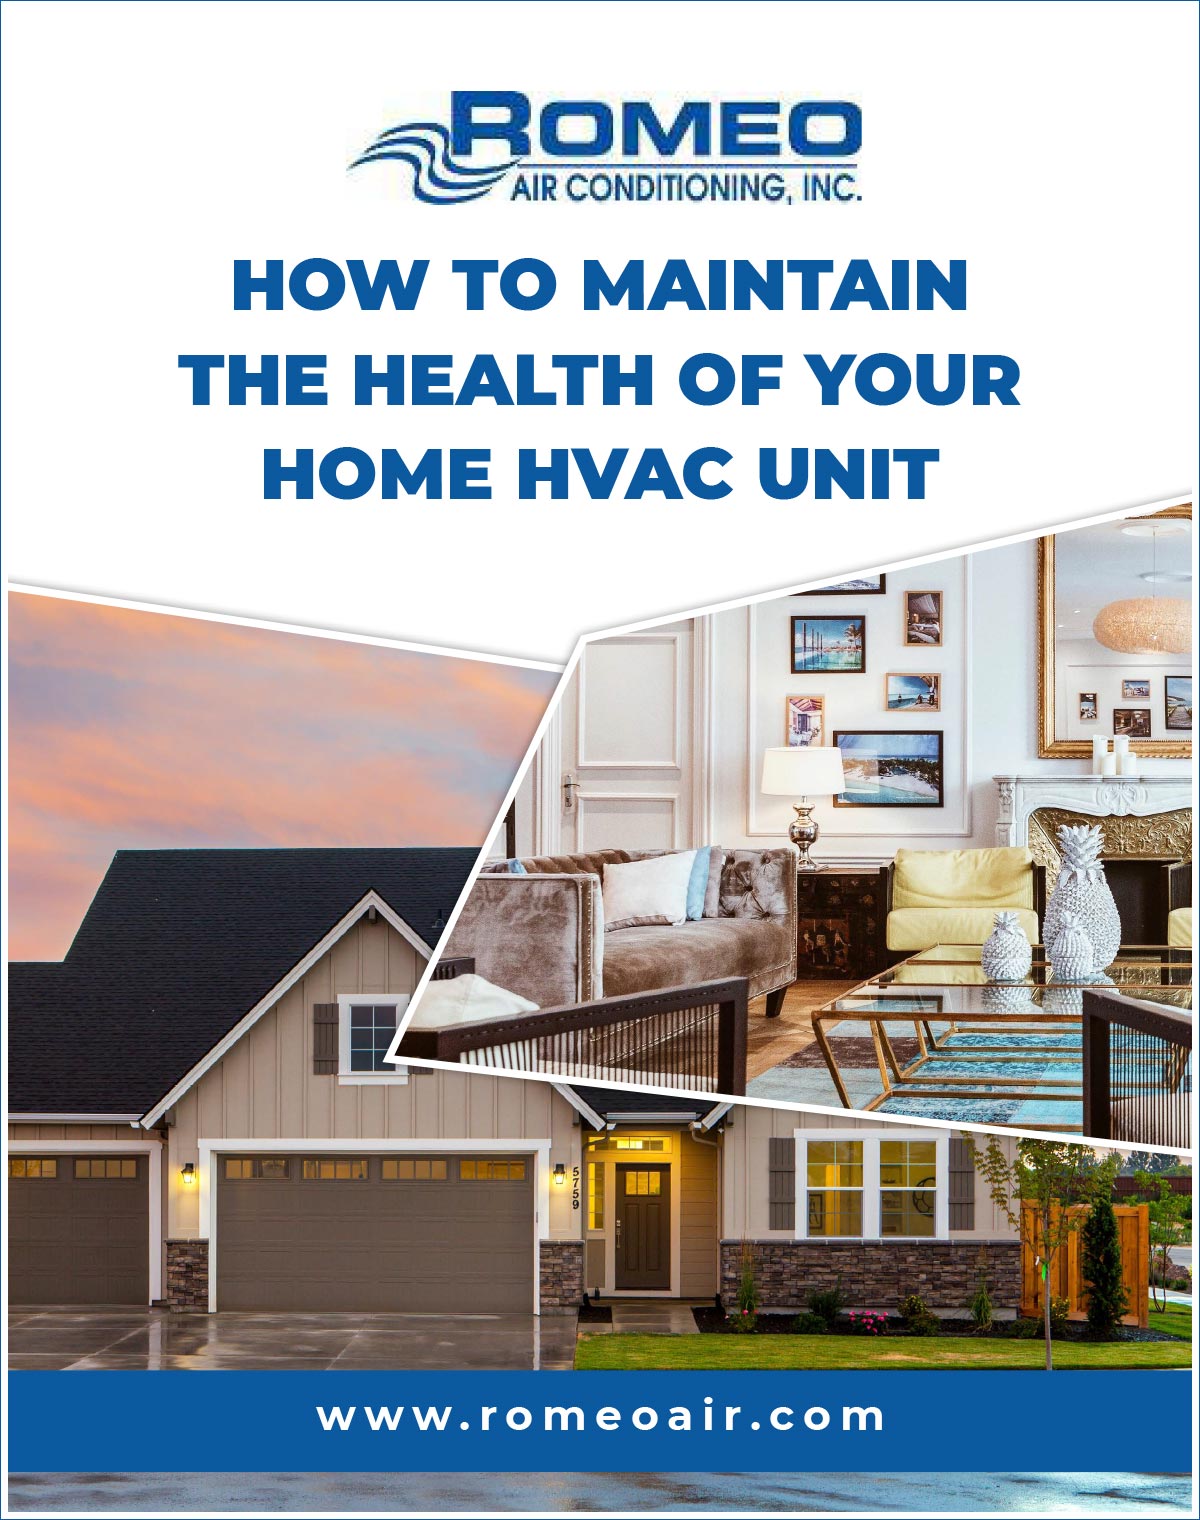 How To Maintain The Health Of Your Home HVAC Unit